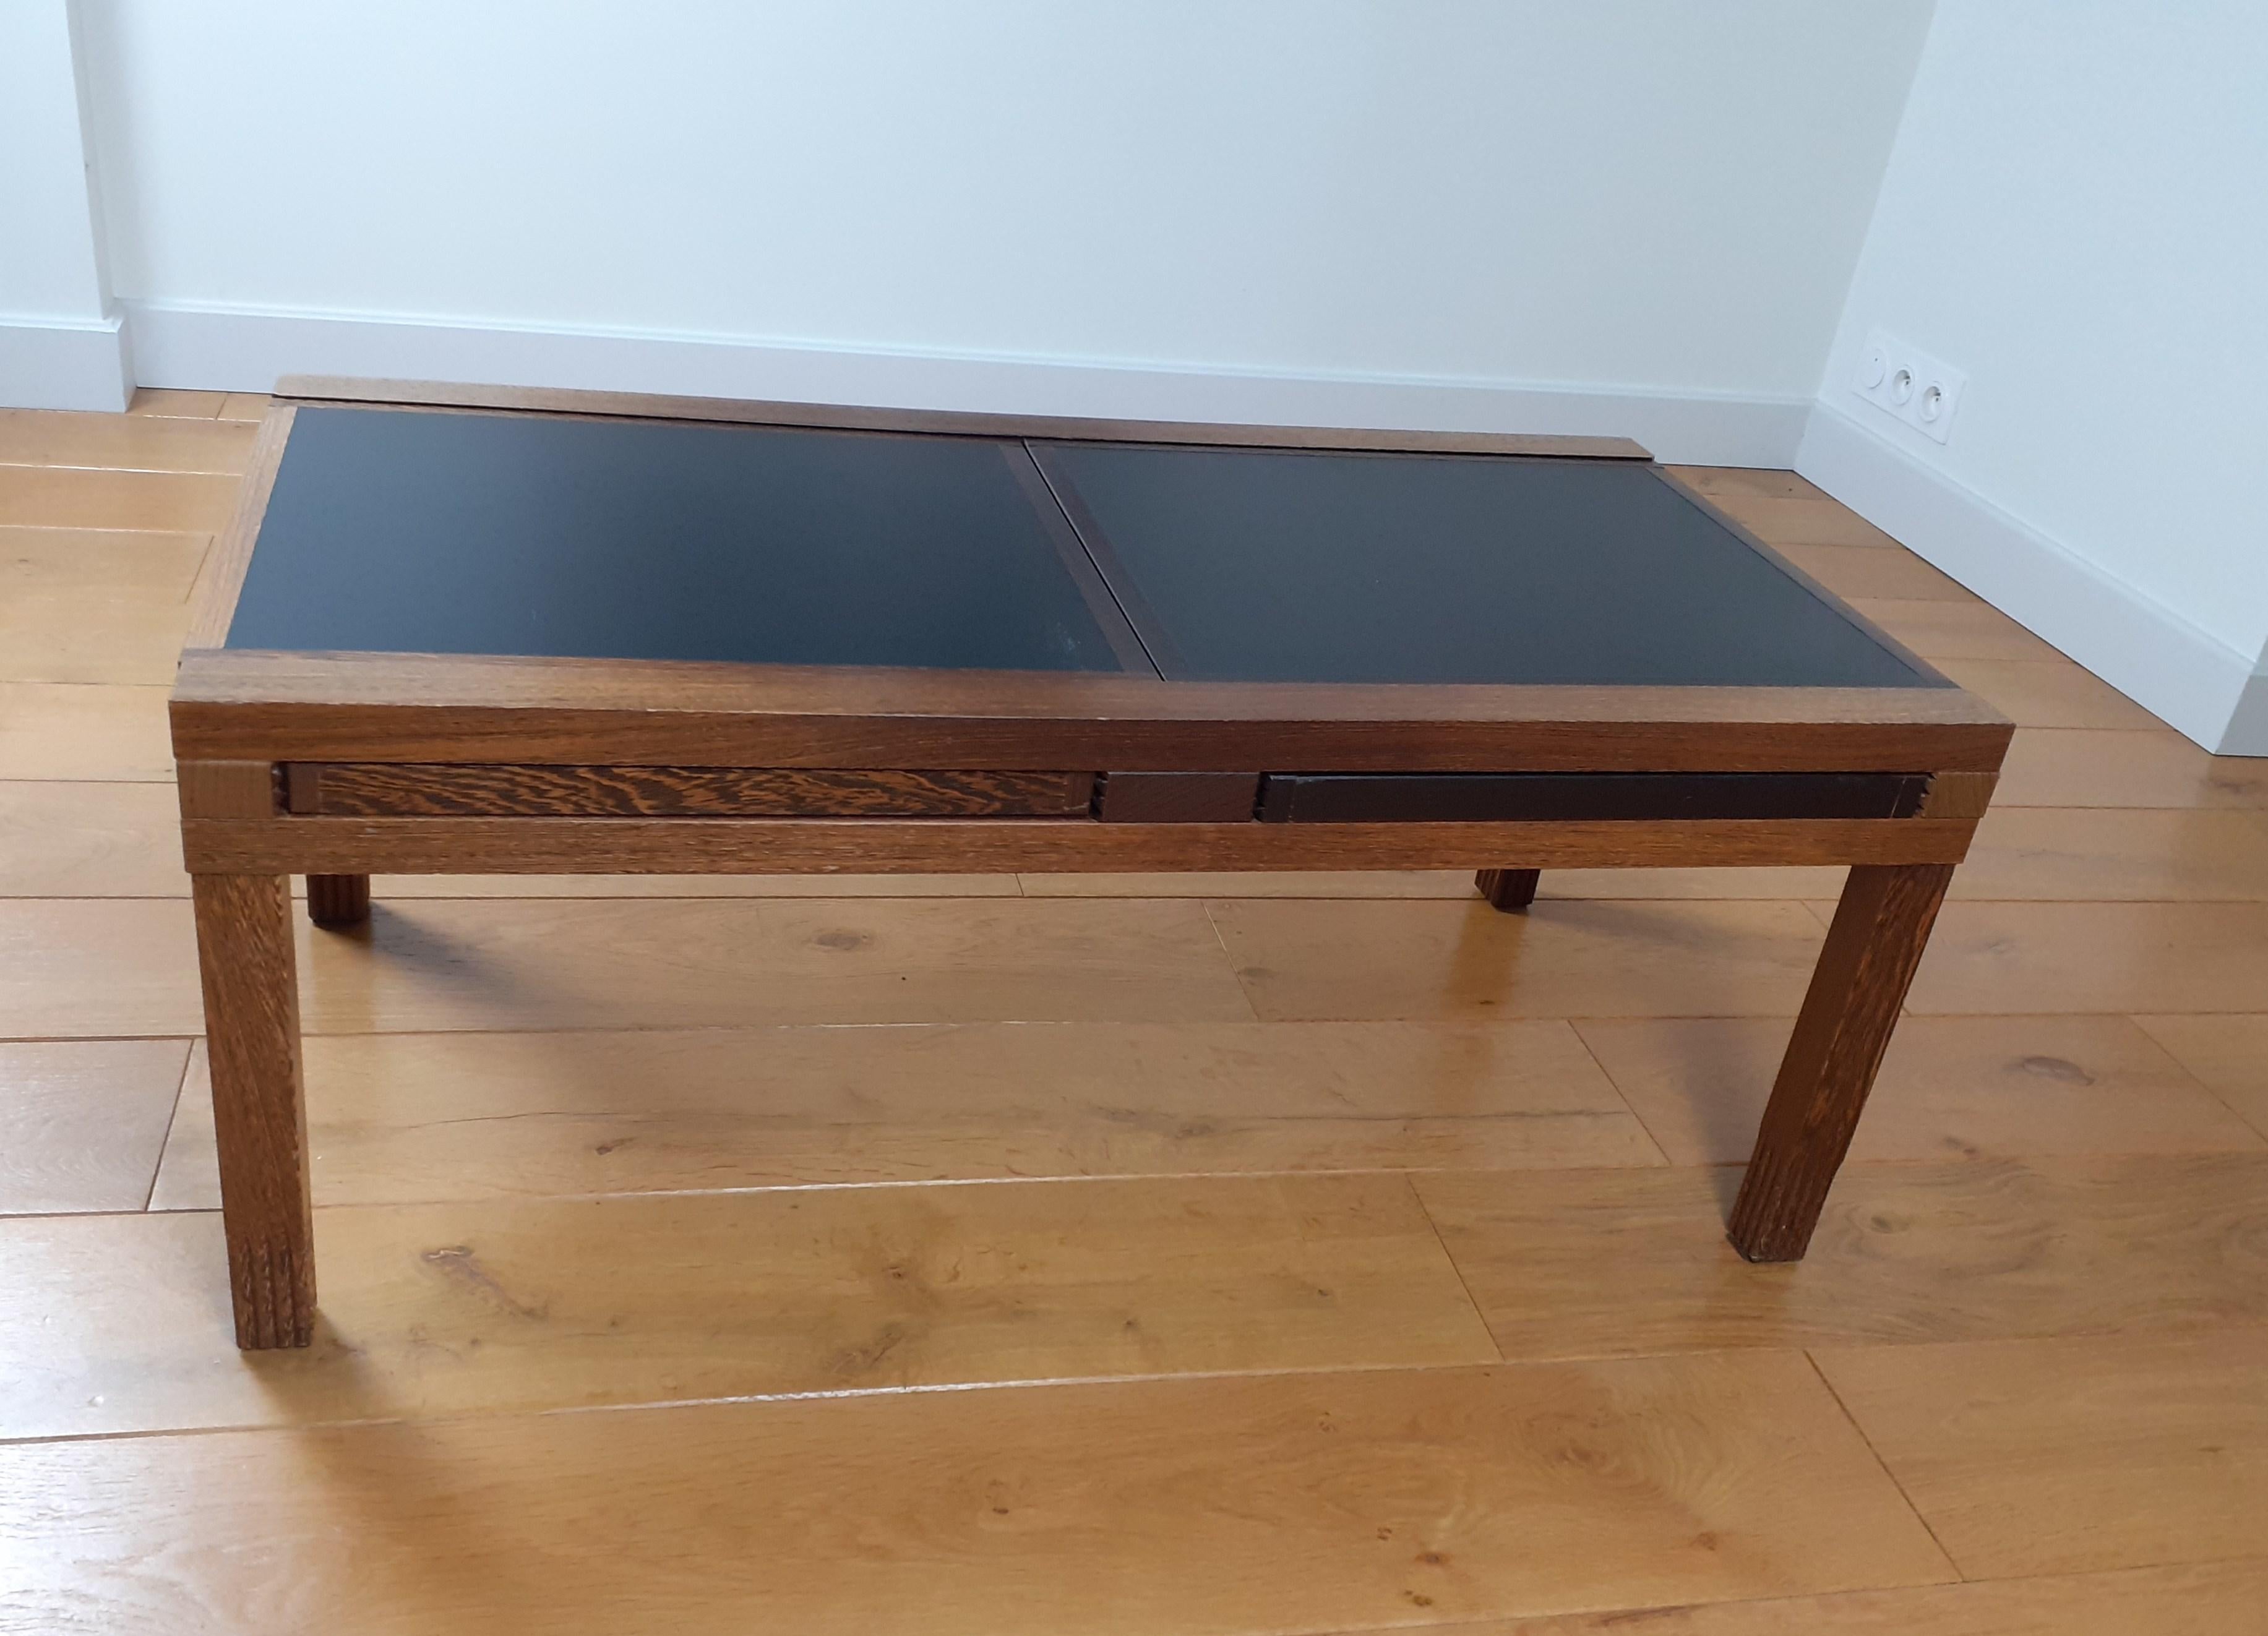 Modular coffee table in Iroko wood, black lacquer top.
This table was created in the 1980s designed by Bernard Vuarnesson model Hexa.
Signed on the base (see photo)
Size 98/49/40 cm
Open: 176/136/40
Very good original condition.